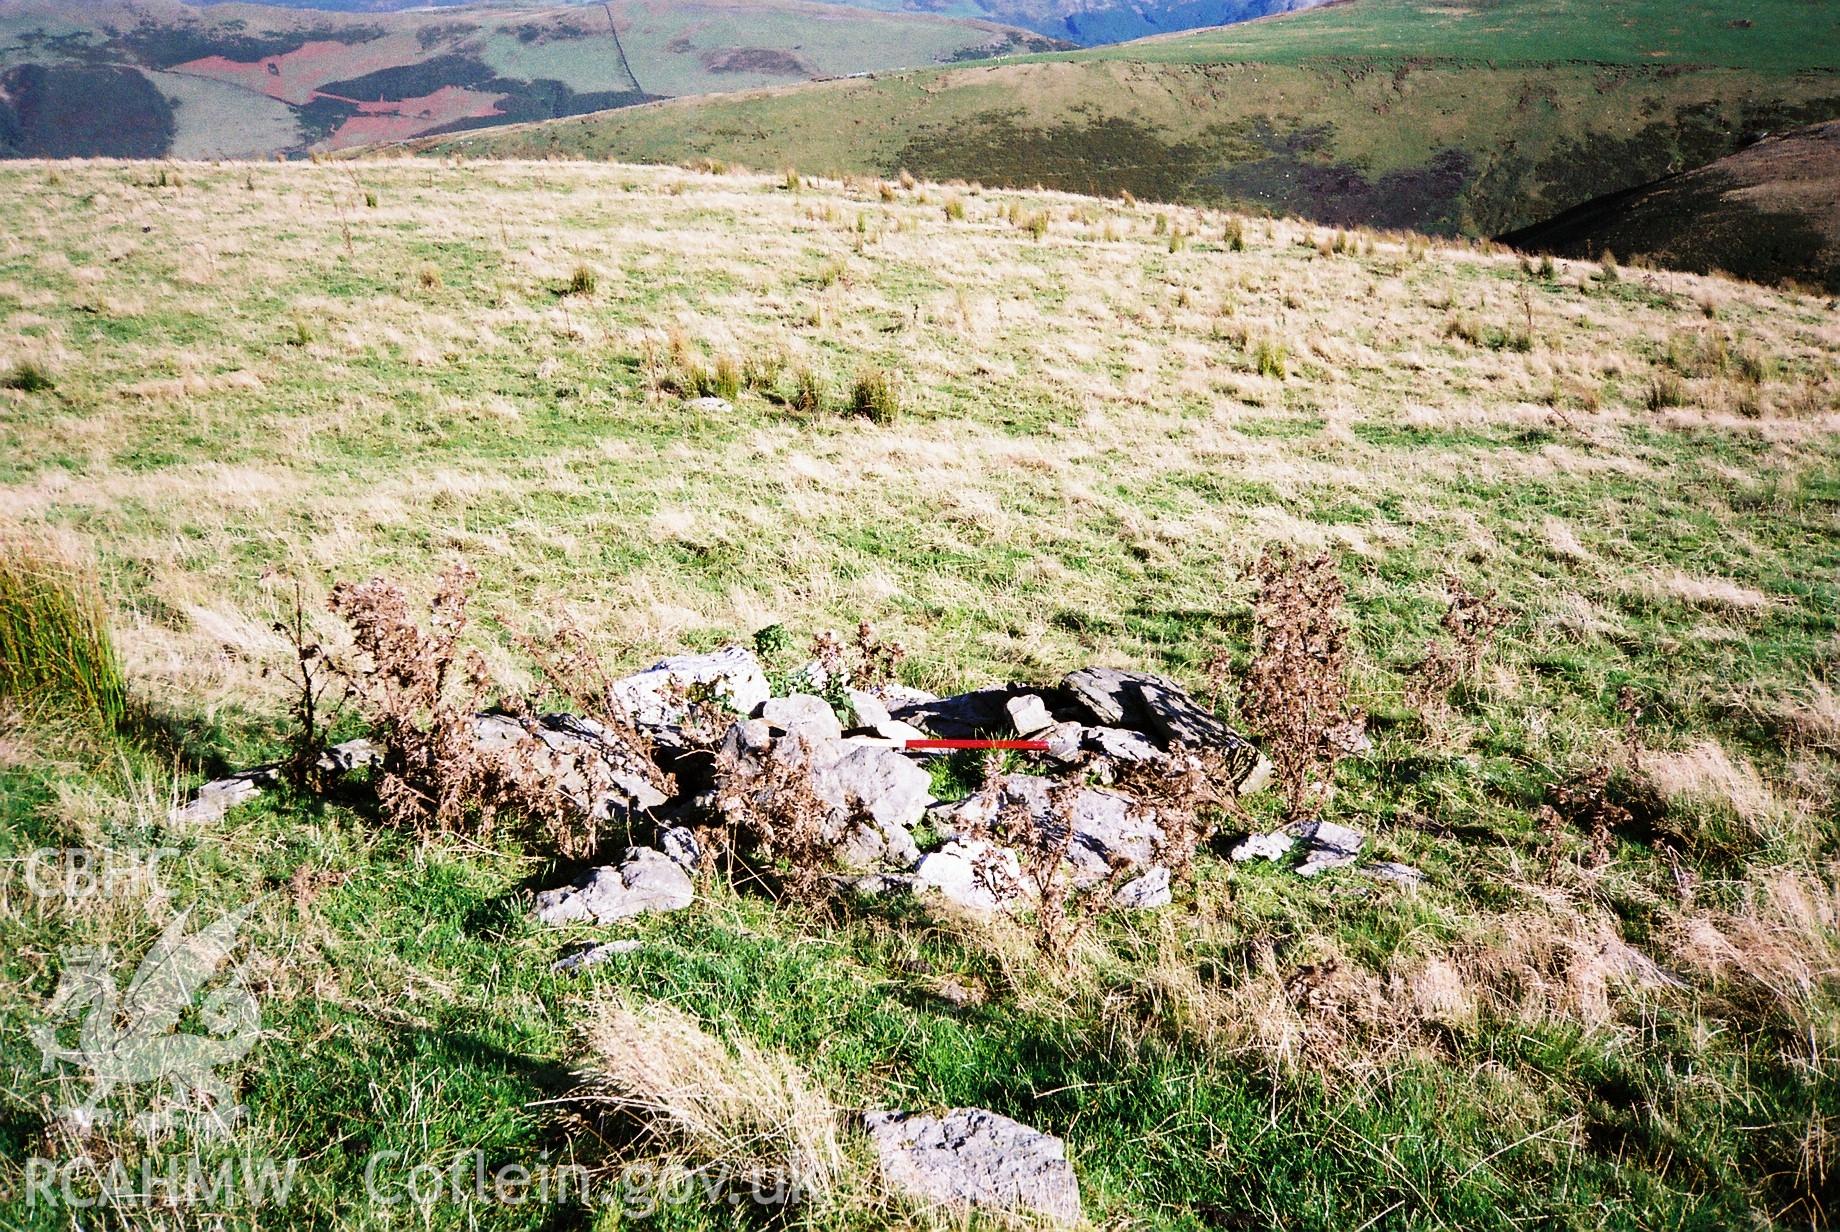 Digital colour photograph of a cairn at Cwm Pandy taken on 16/09/2005 by A.C. Roseveare during the Tywyn Dolgoch Upland Survey undertaken by Archaeophysica.